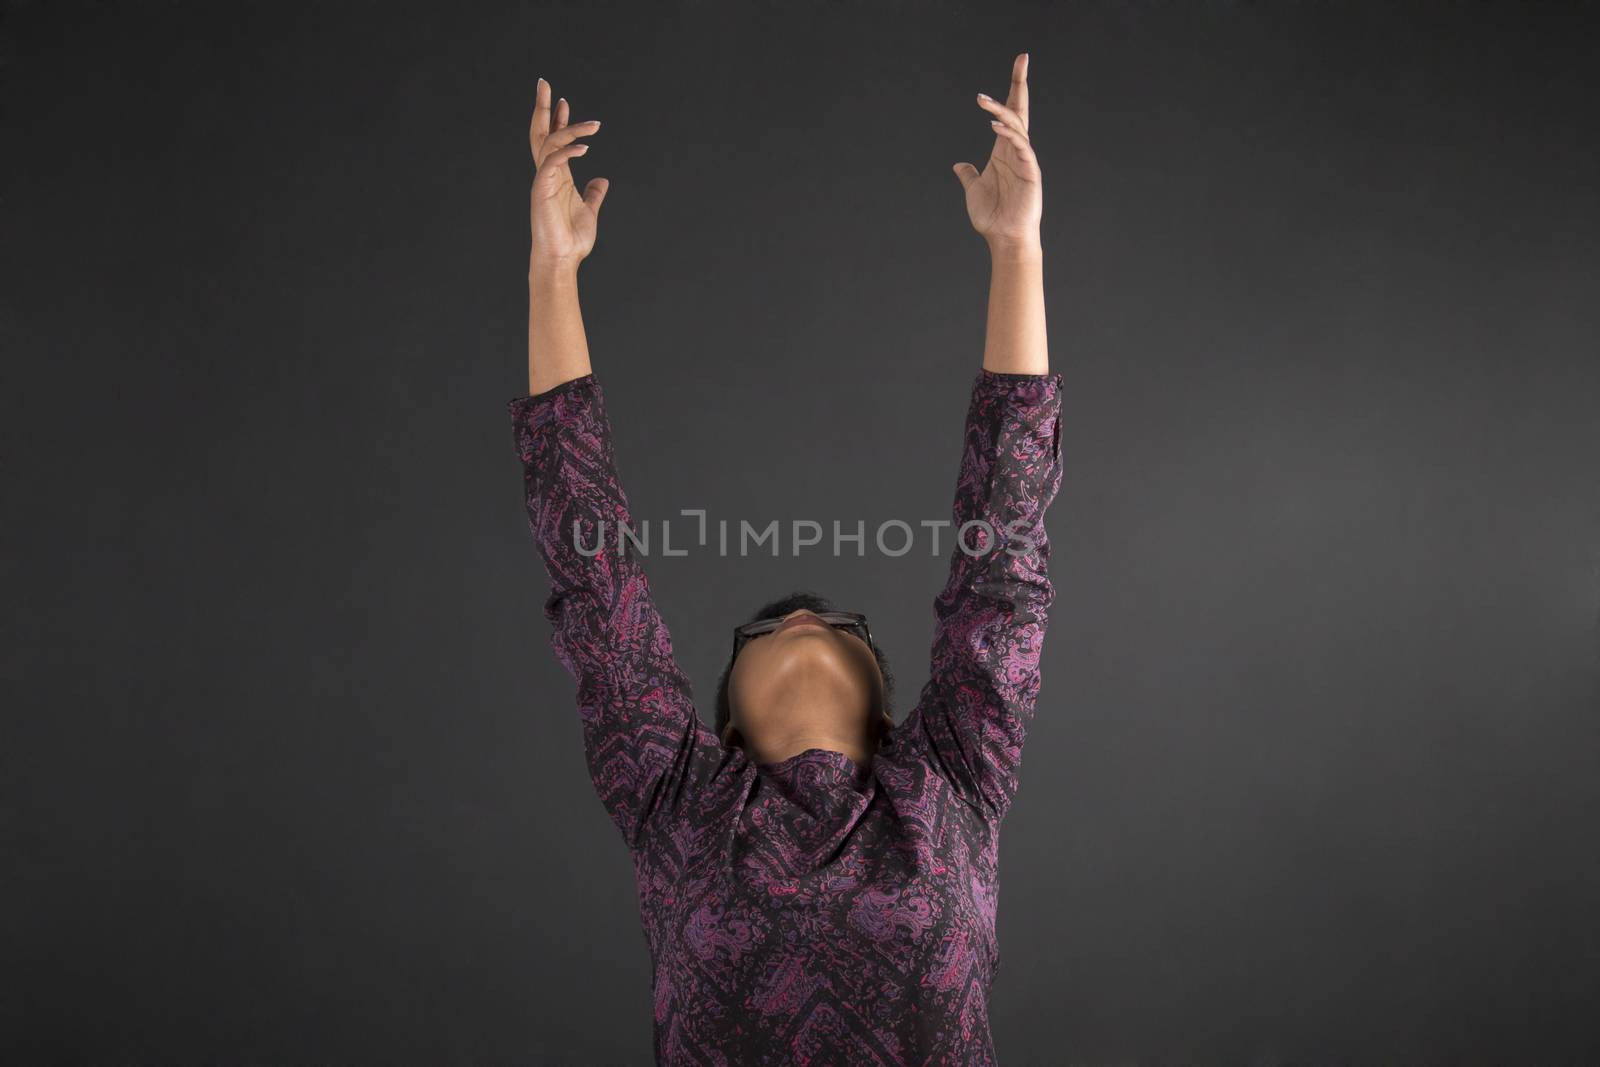 South African or African American woman teacher or student reaching for the sky on blackboard background by alistaircotton